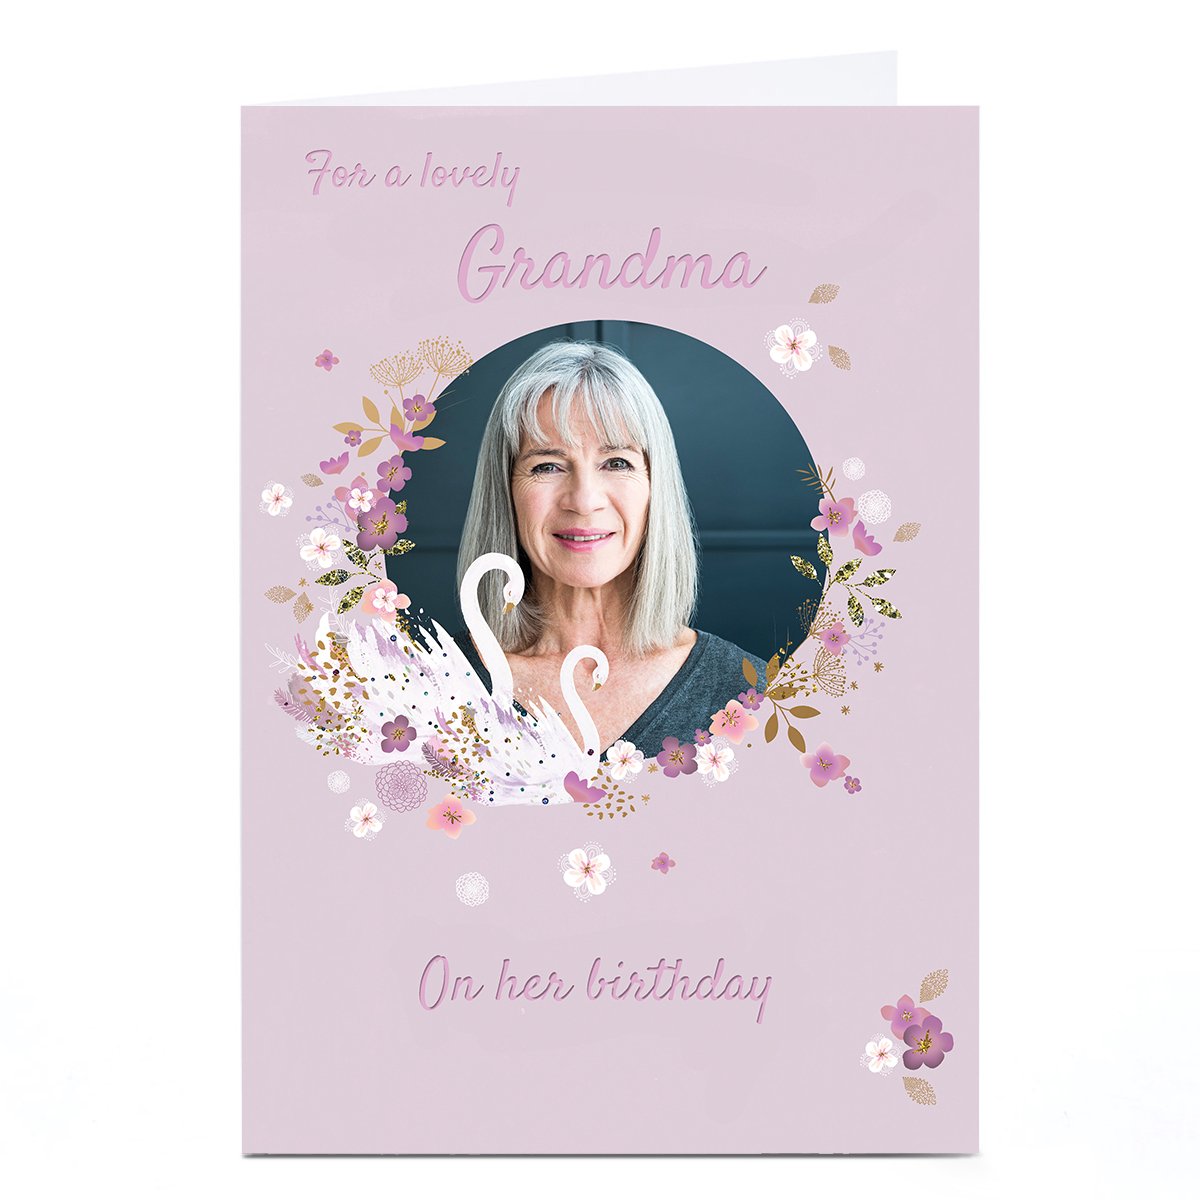 Personalised Kerry Spurling Photo Card - Lovely Grandma